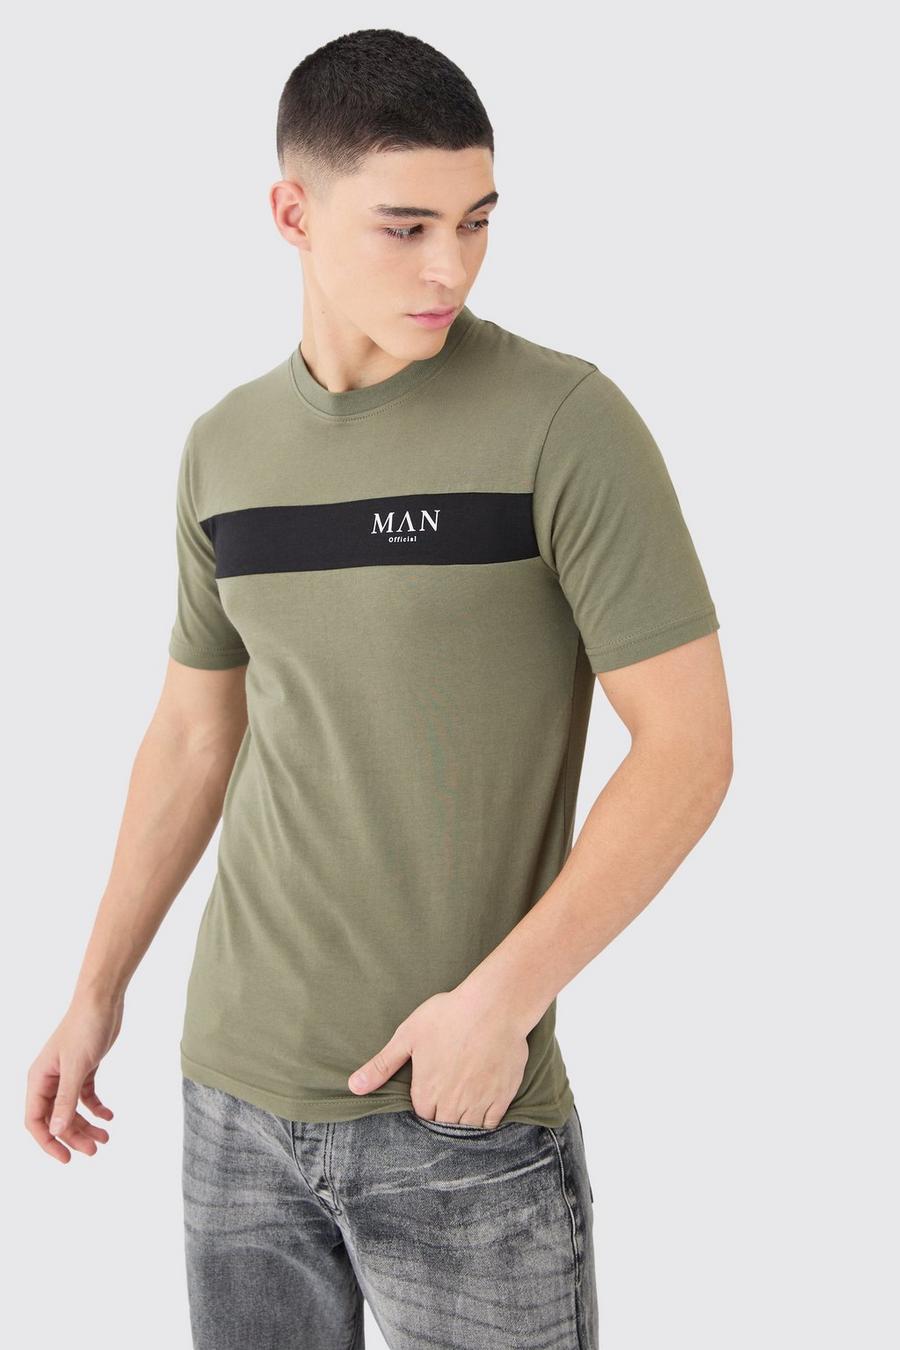 Man Roman Muscle-Fit Colorblock T-Shirt, Olive image number 1